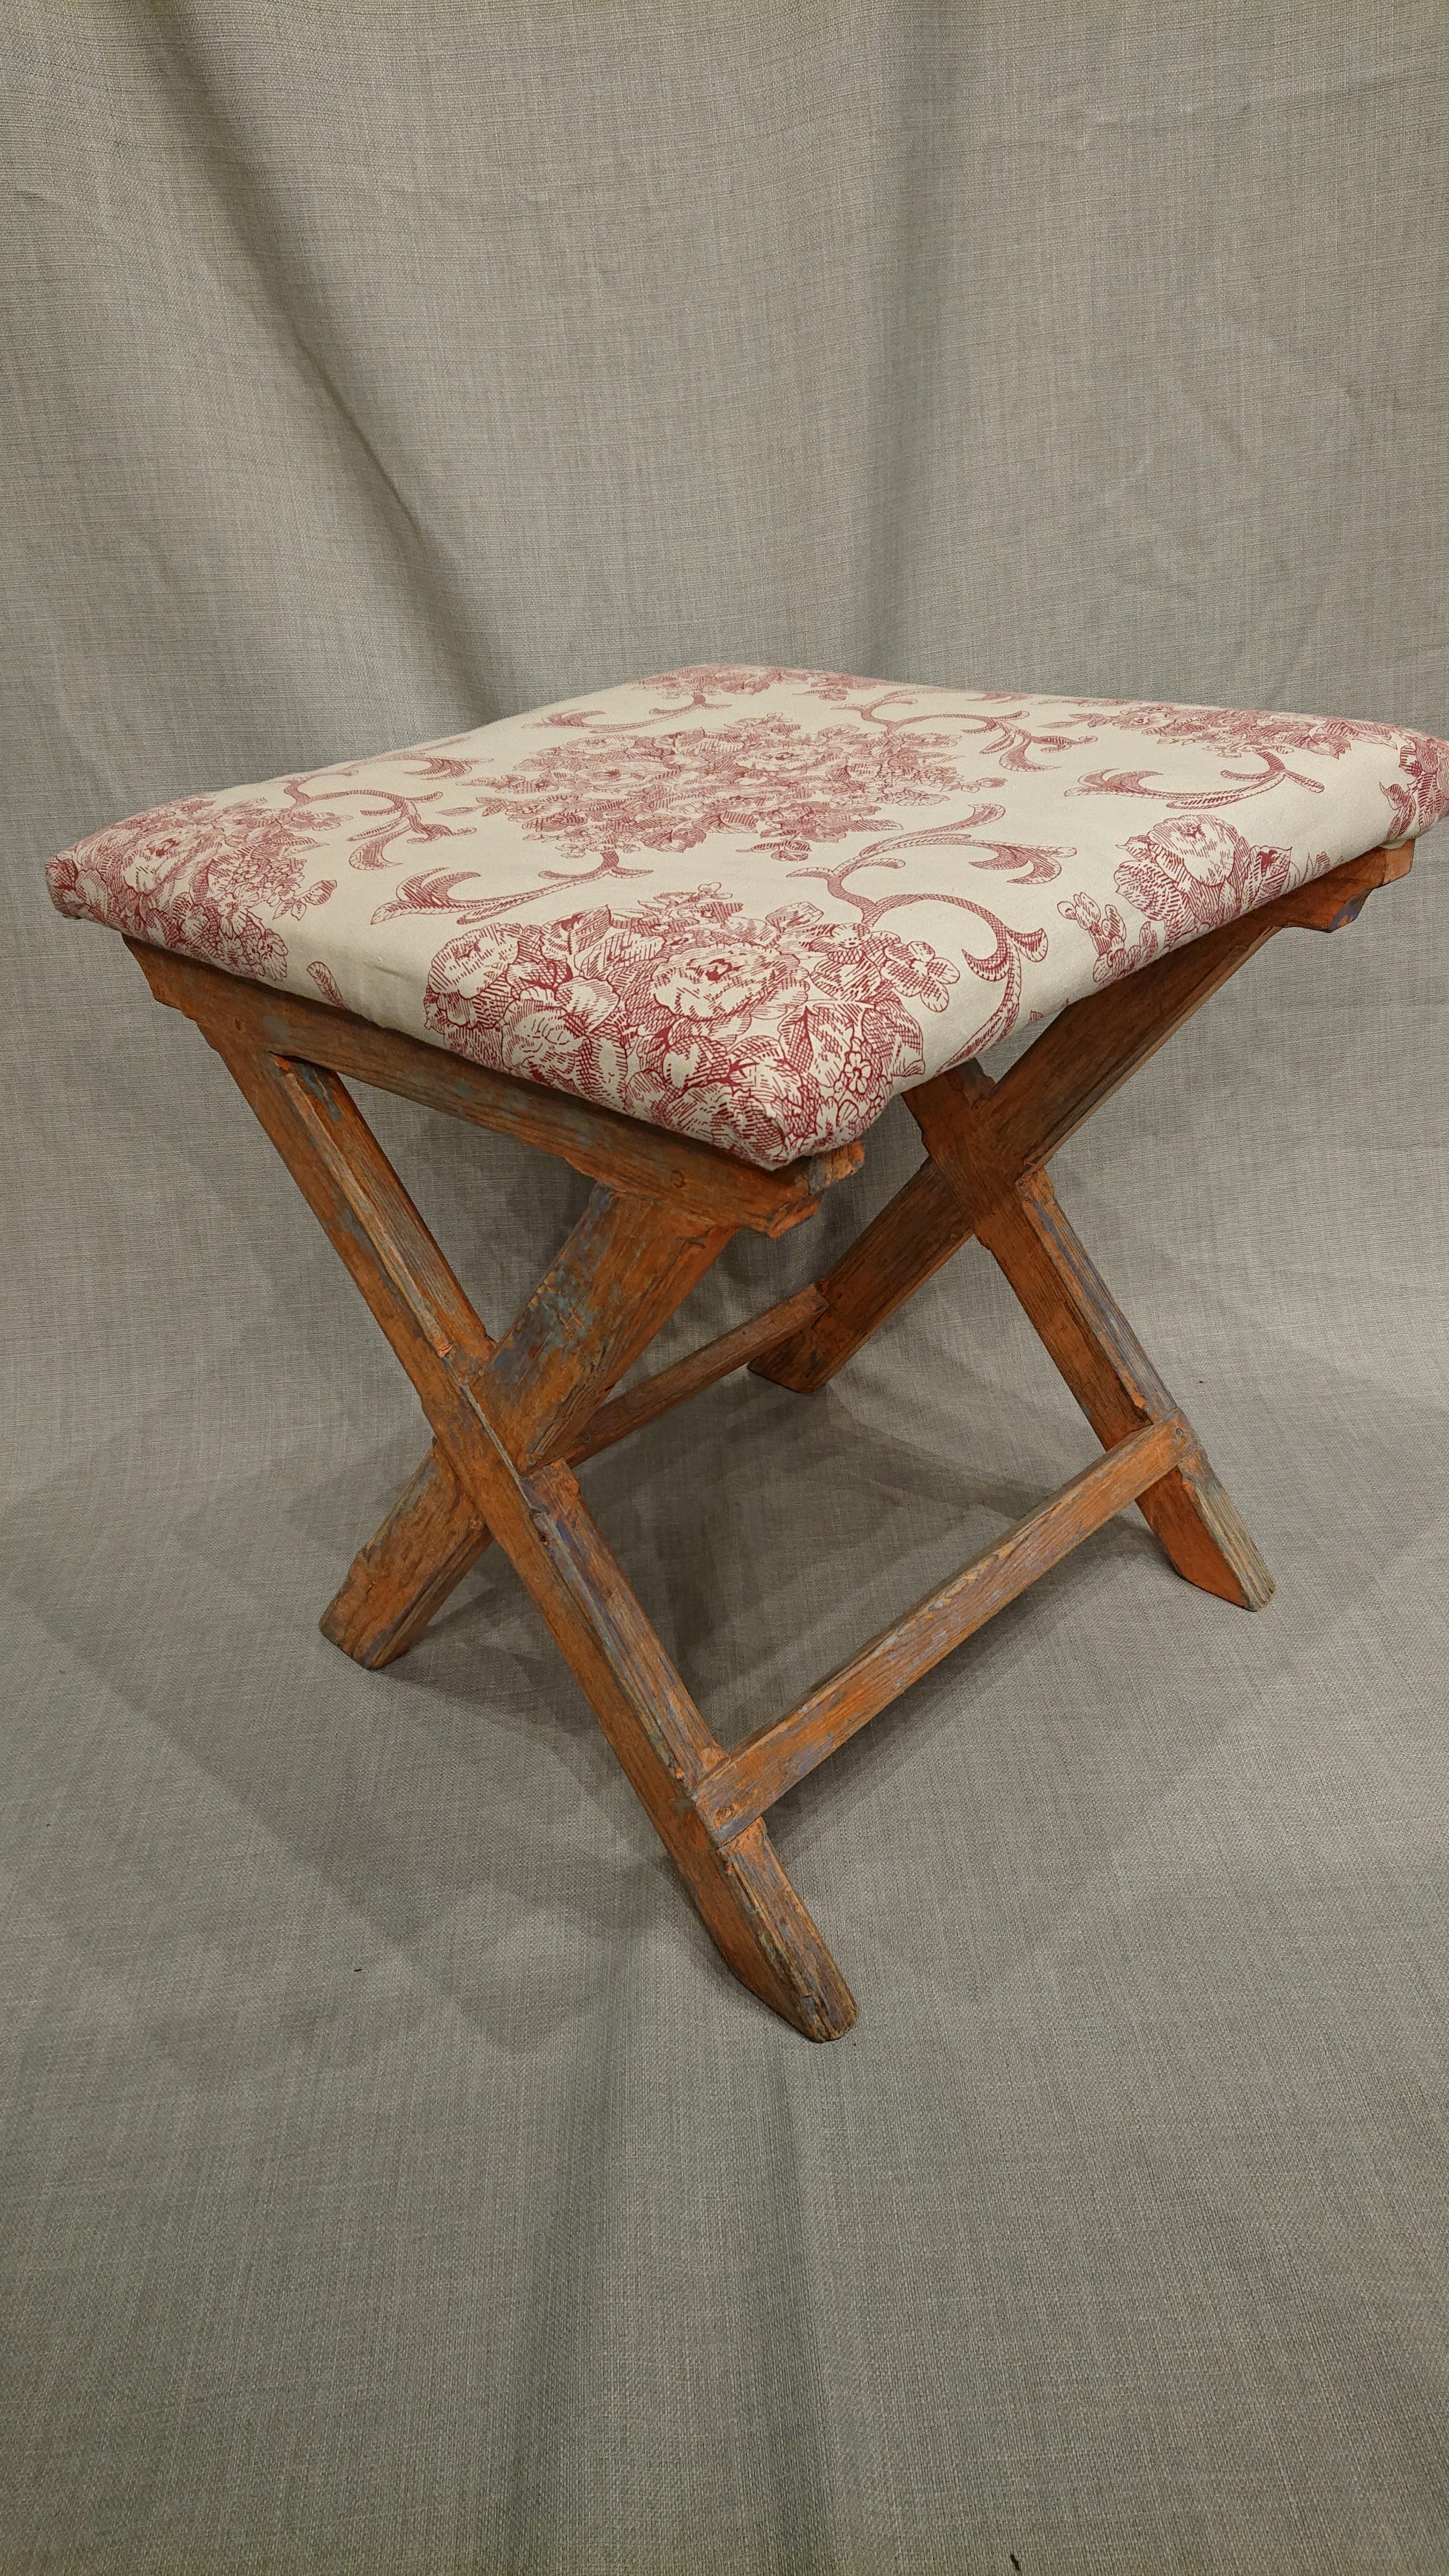 19th century Swedish Folk Art stool from Umea Vasterbotten, Northern Sweden.
A very charming stool. 
The Stool`s seat is made of wood but is upholstered in a beautiful fabric.
Scraped by hand to its original paint.
Made in painted pine.
  